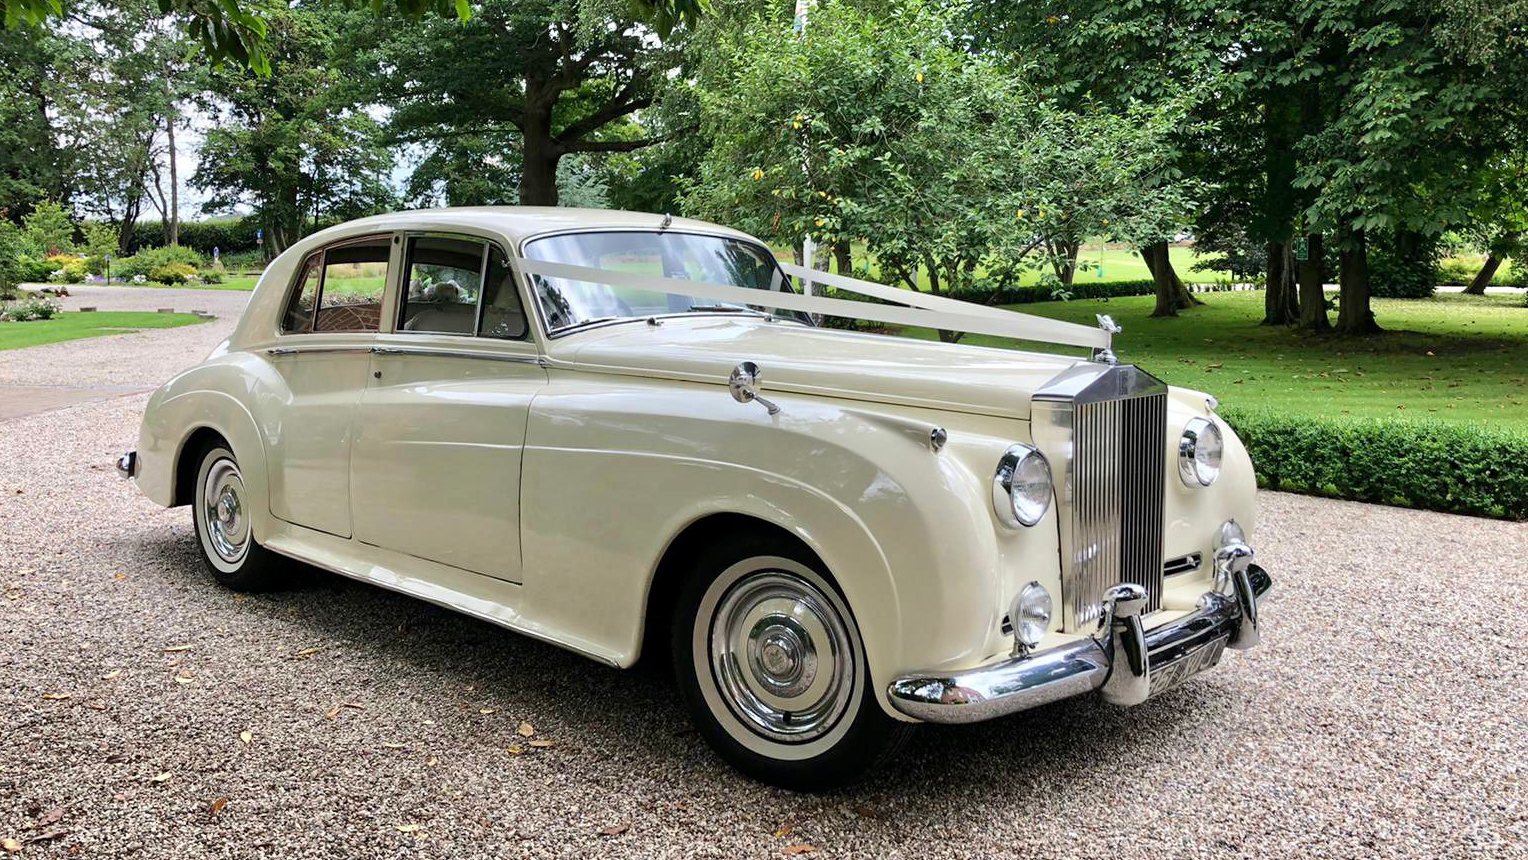 Classic Rolls-Royce Silver Cloud decorated with Ivory Ribbons at a local Potters Bar park with green trees in the background